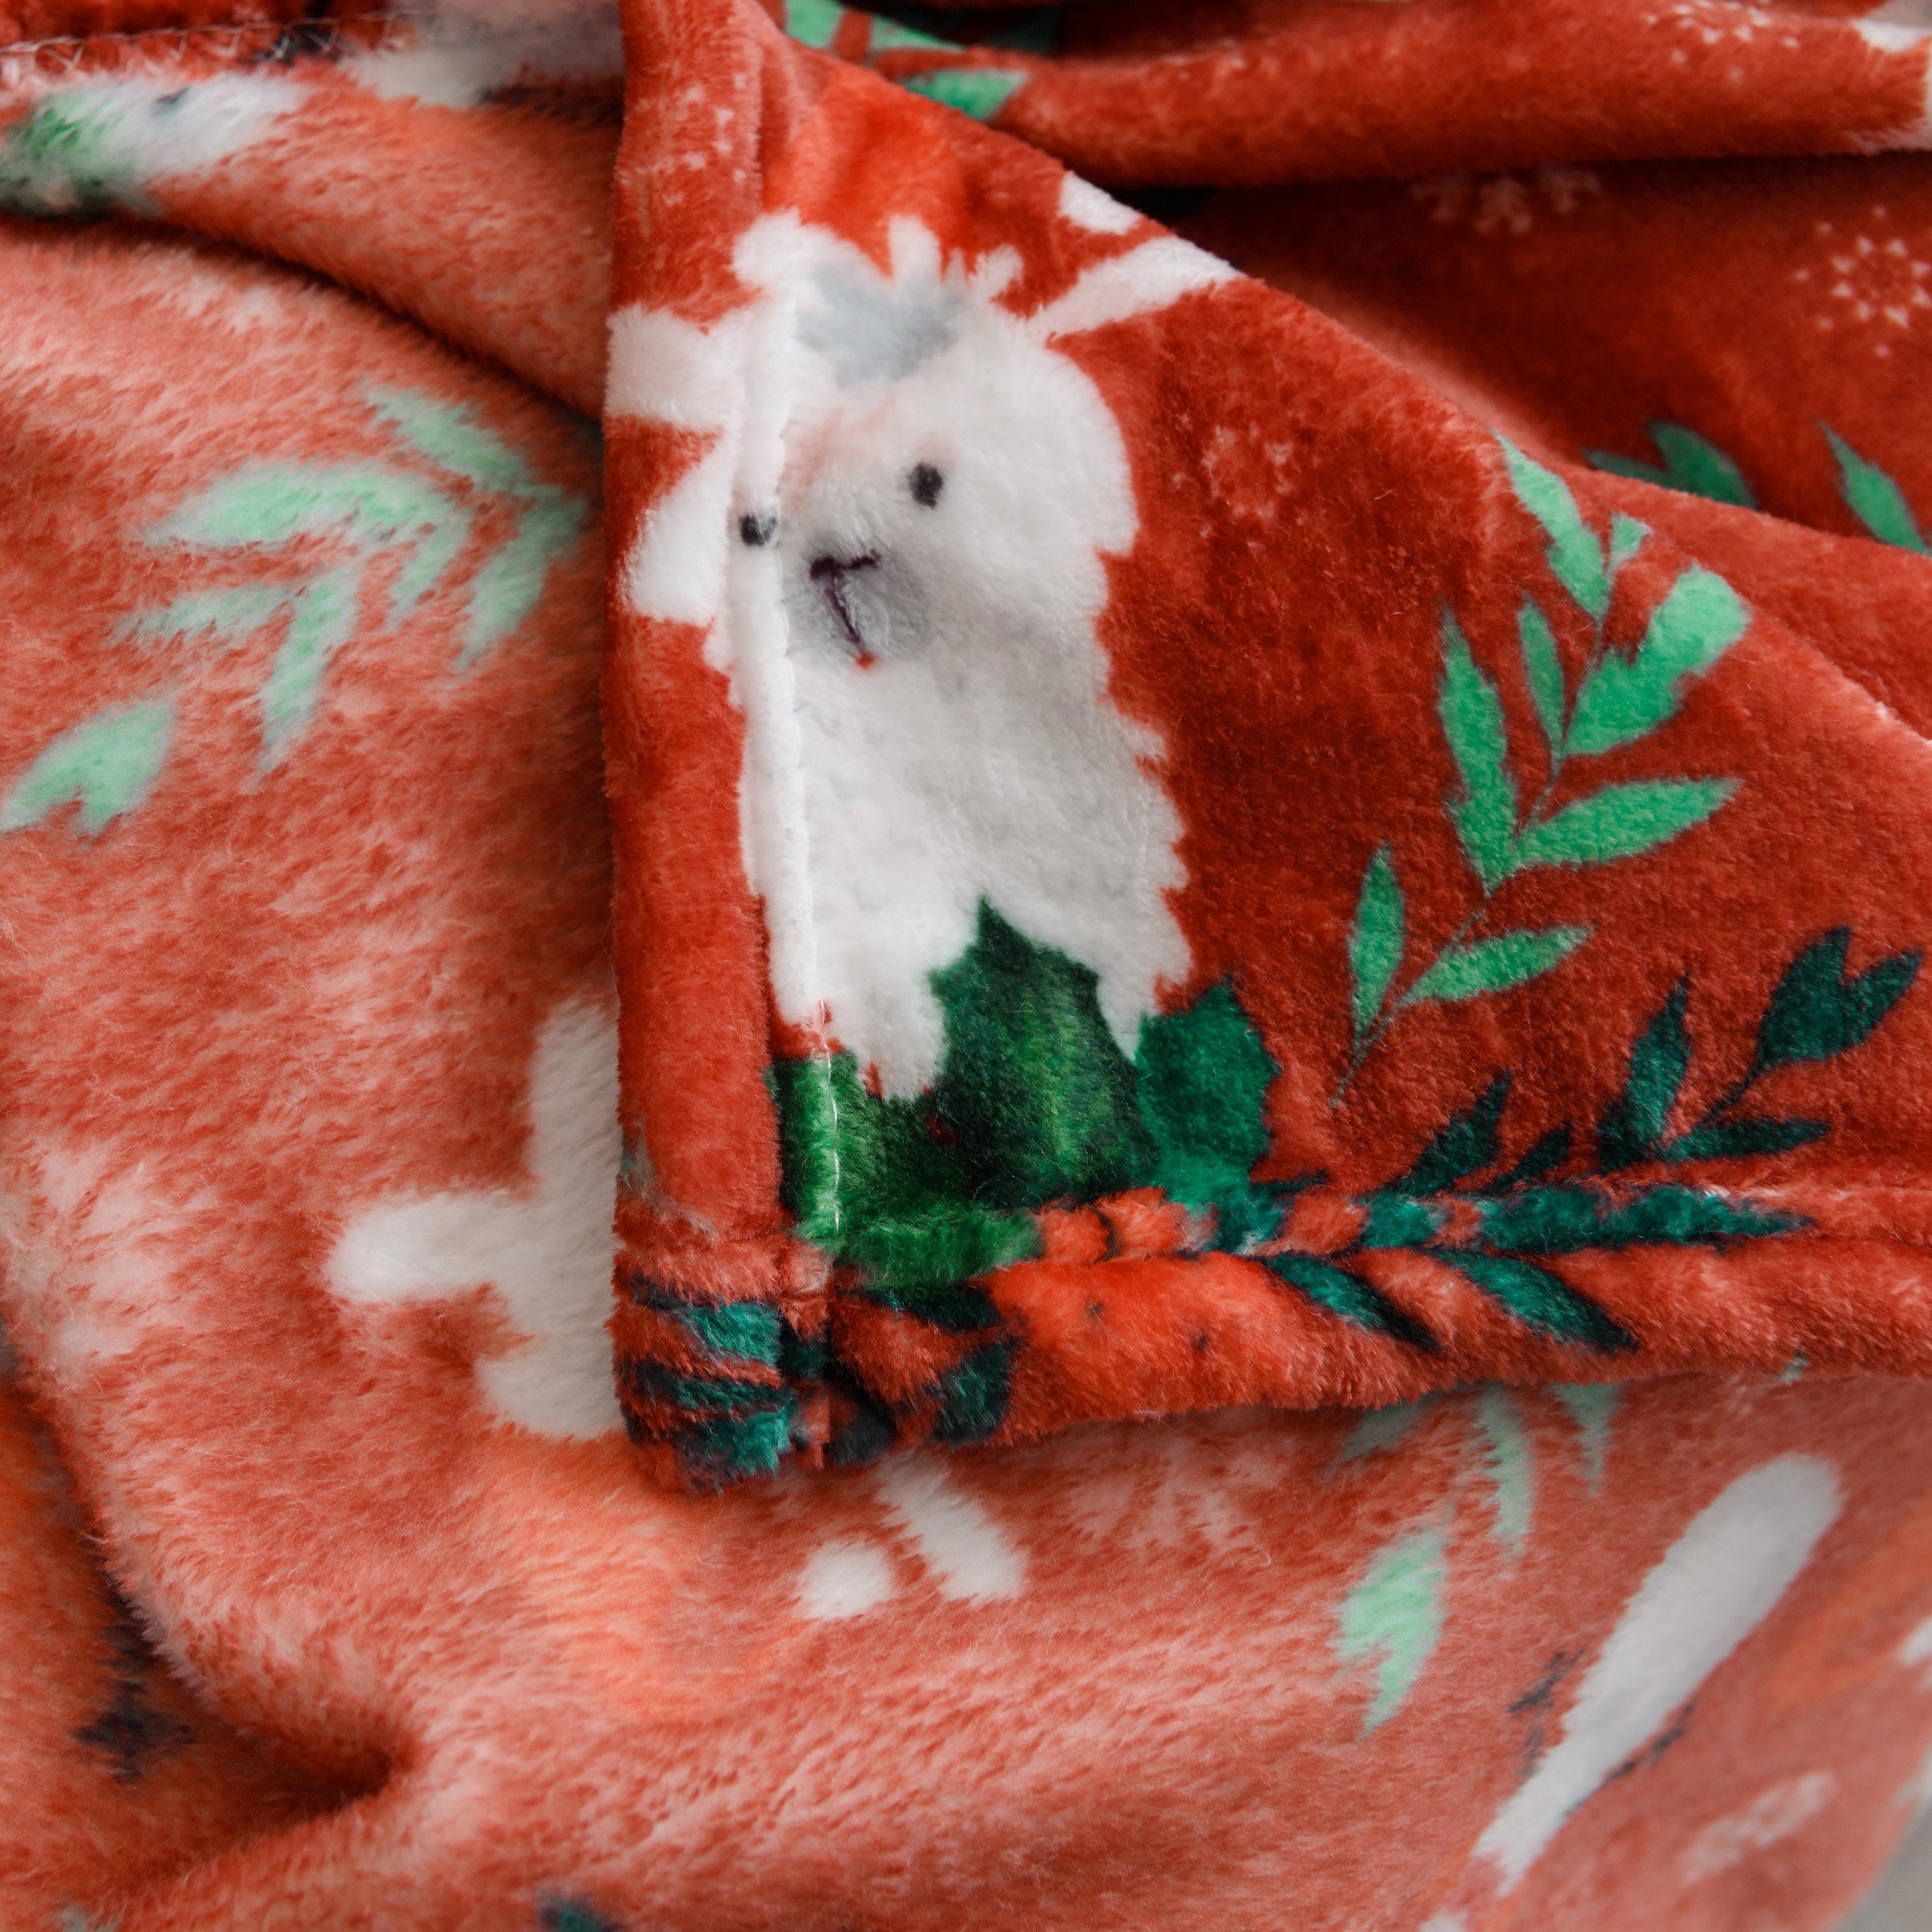 Ultra Soft Oversized Plush Holiday Throw Blanket - Stylish Home Décor for Bed or Couch